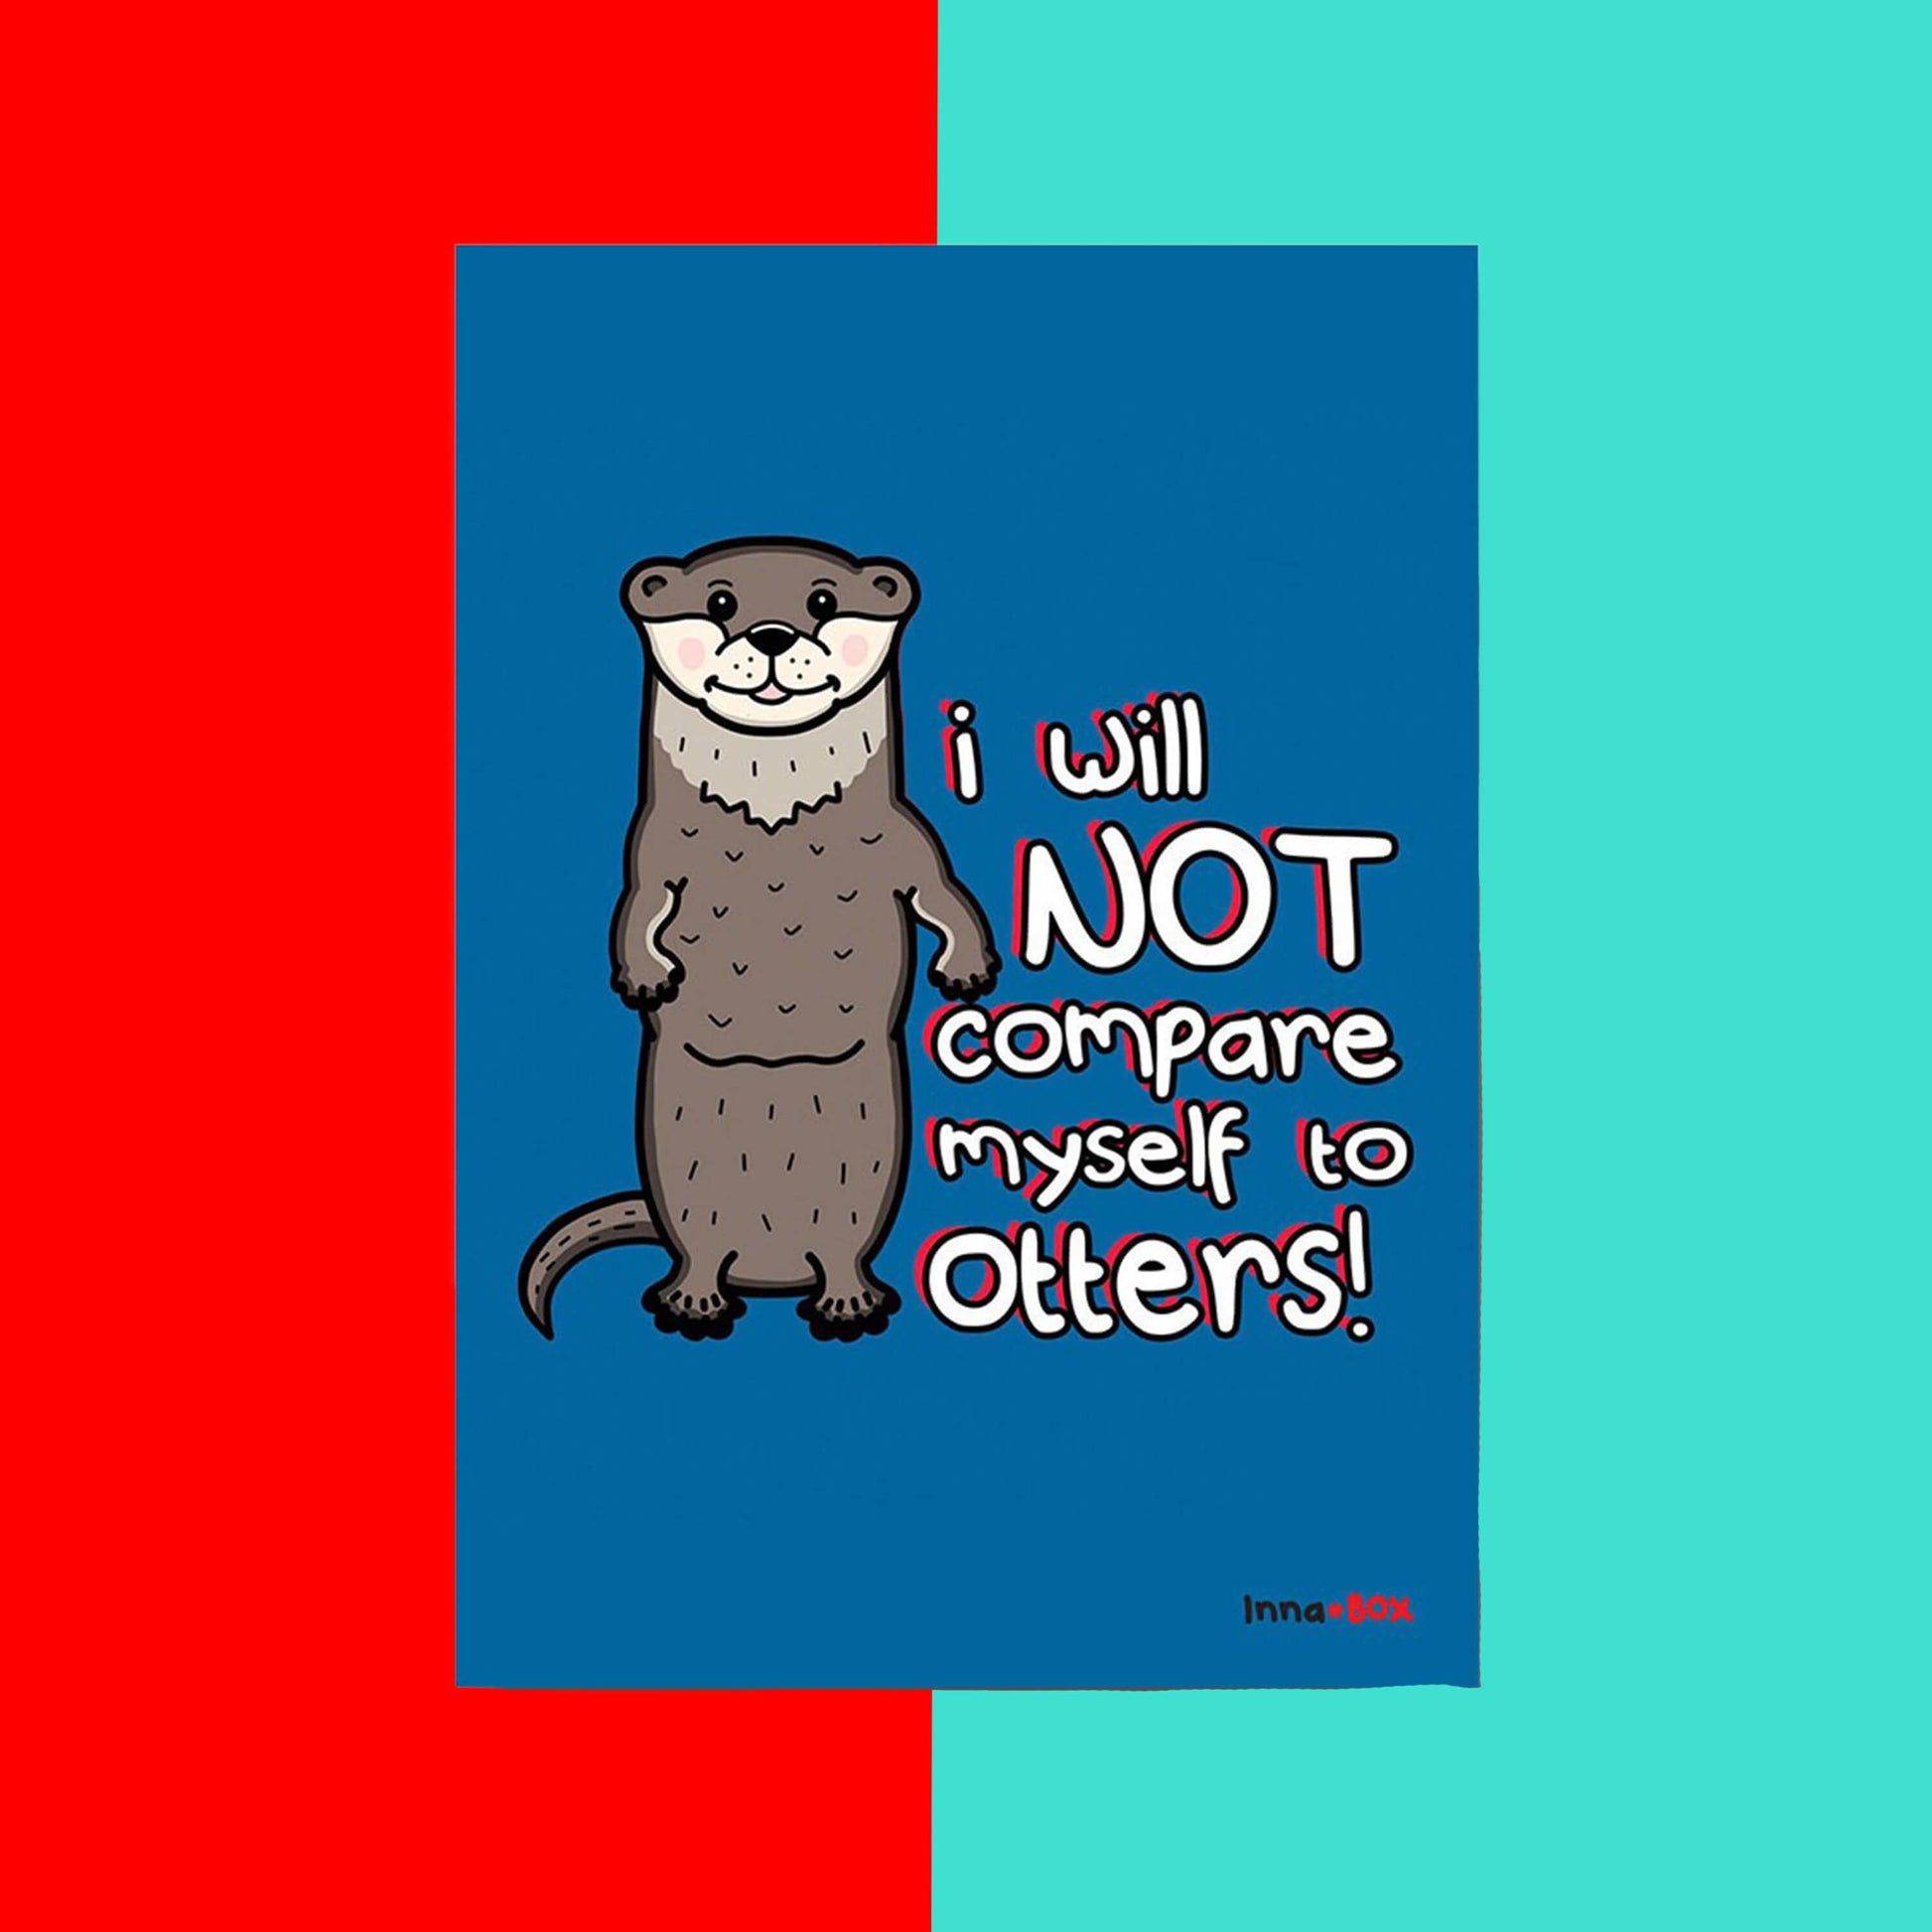 The I Will Not Compare Myself to Others Otters Postcard on a red and blue background. The blue postcard features a standing smiling grey otter with red, black and white text that reads 'I will not compare myself to otters!'. A self care and self love inspired design.